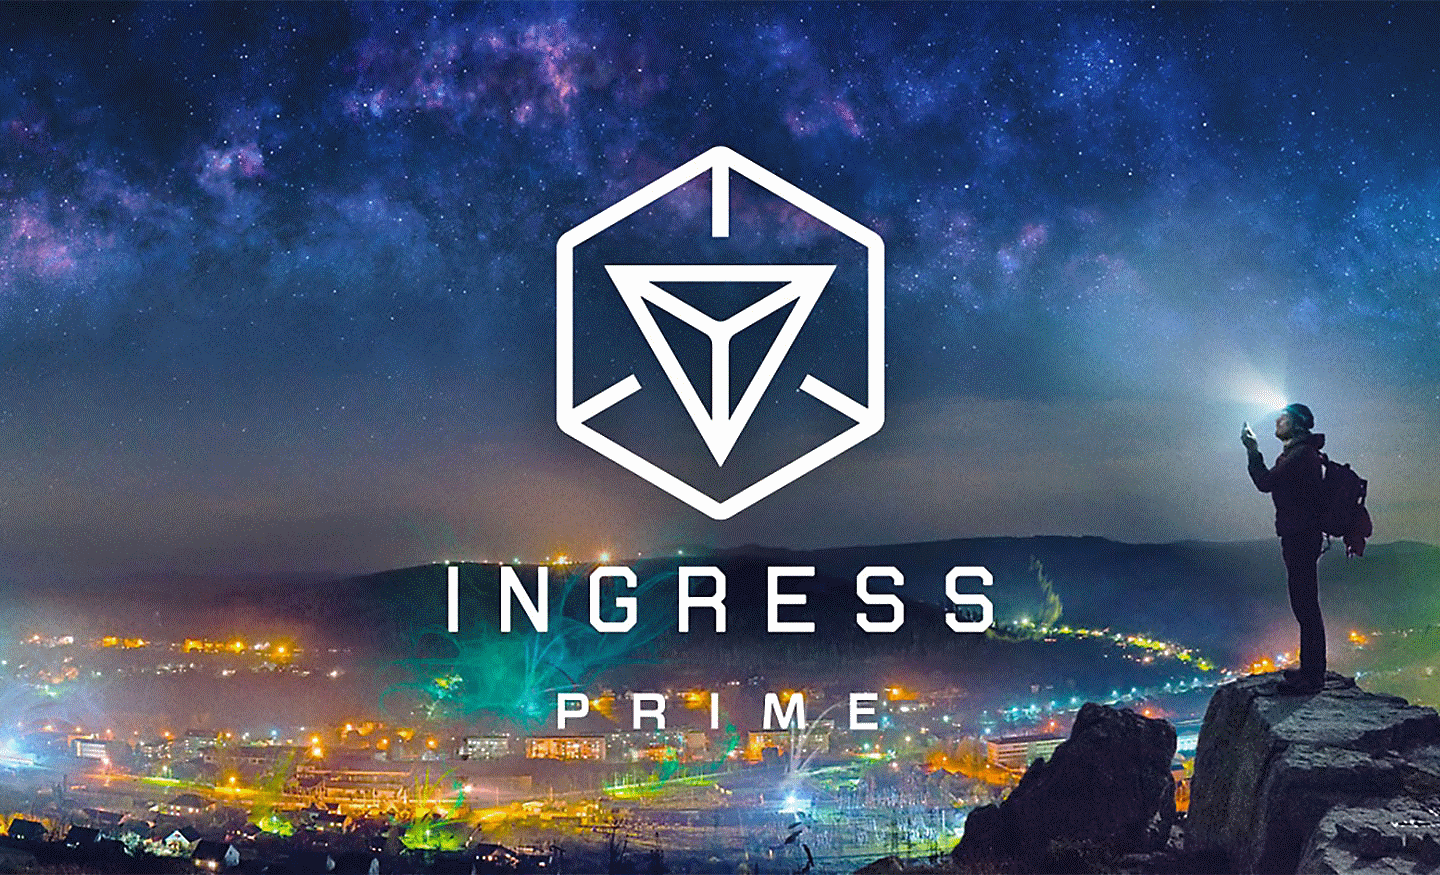 Image of city from above with the Ingress Prime logo overlaid in the middle